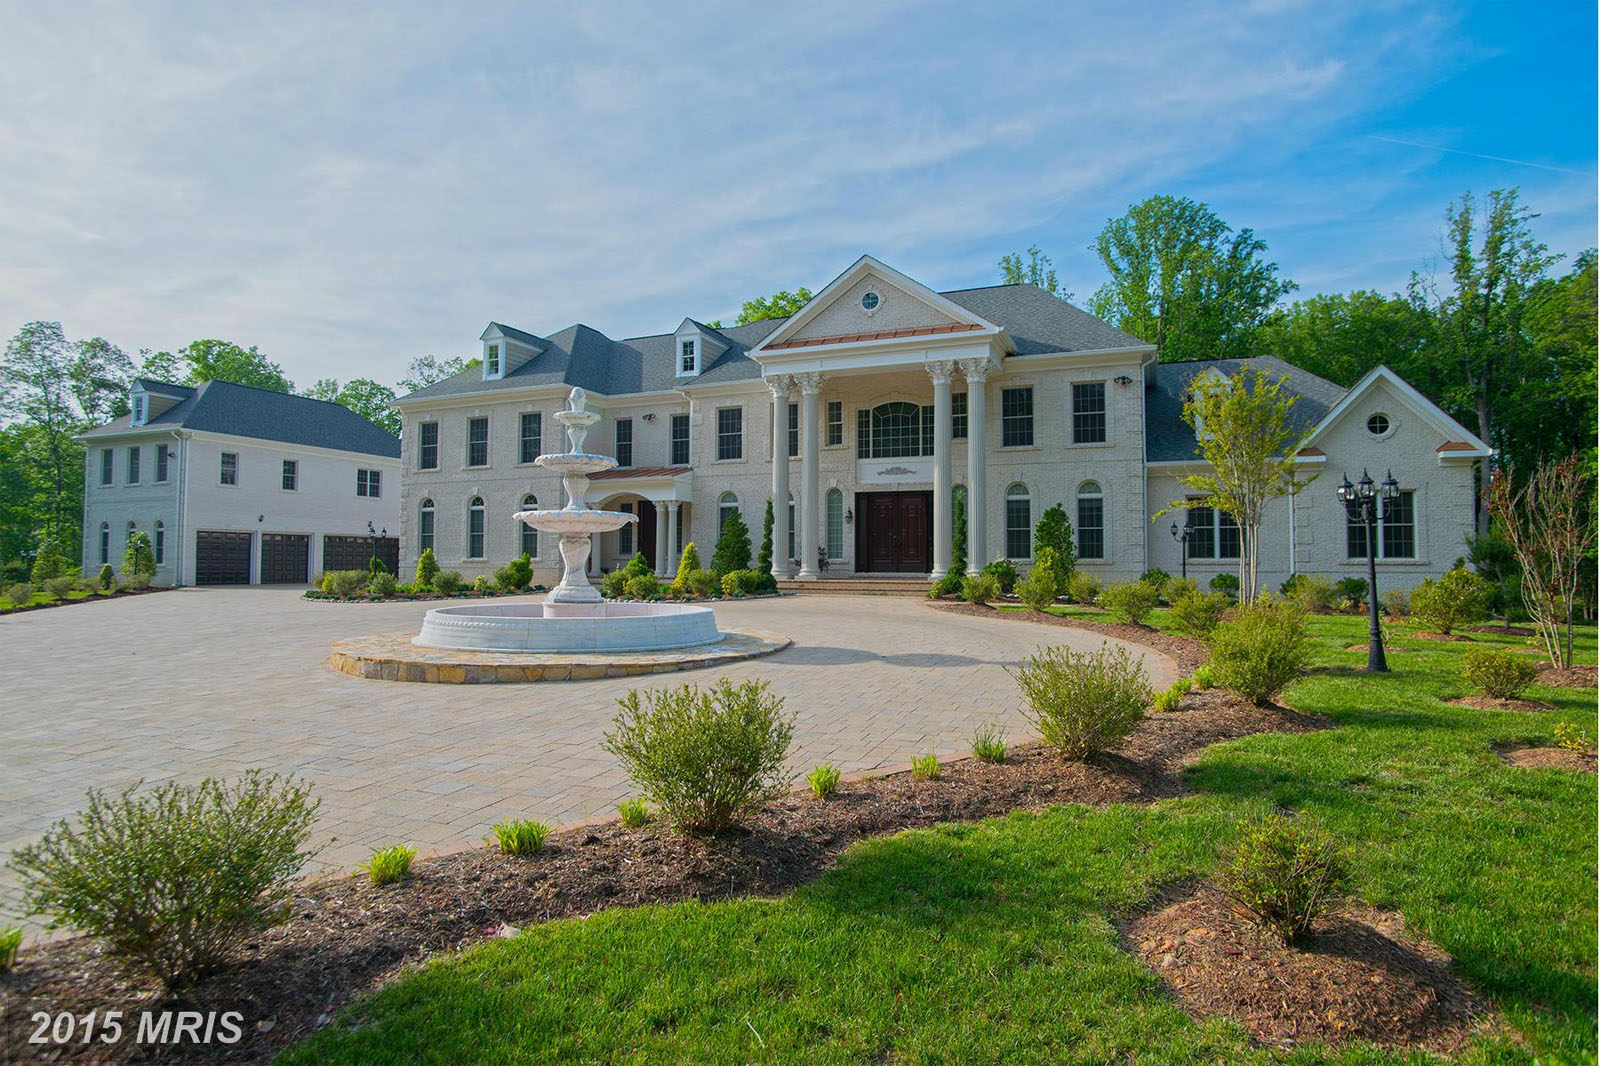 5. $3,767,000
This 2011 Great Falls, Virginia, home in the Taylor Spencer subdivision has six bedrooms, seven bathrooms, and two half-baths. (MRIS)